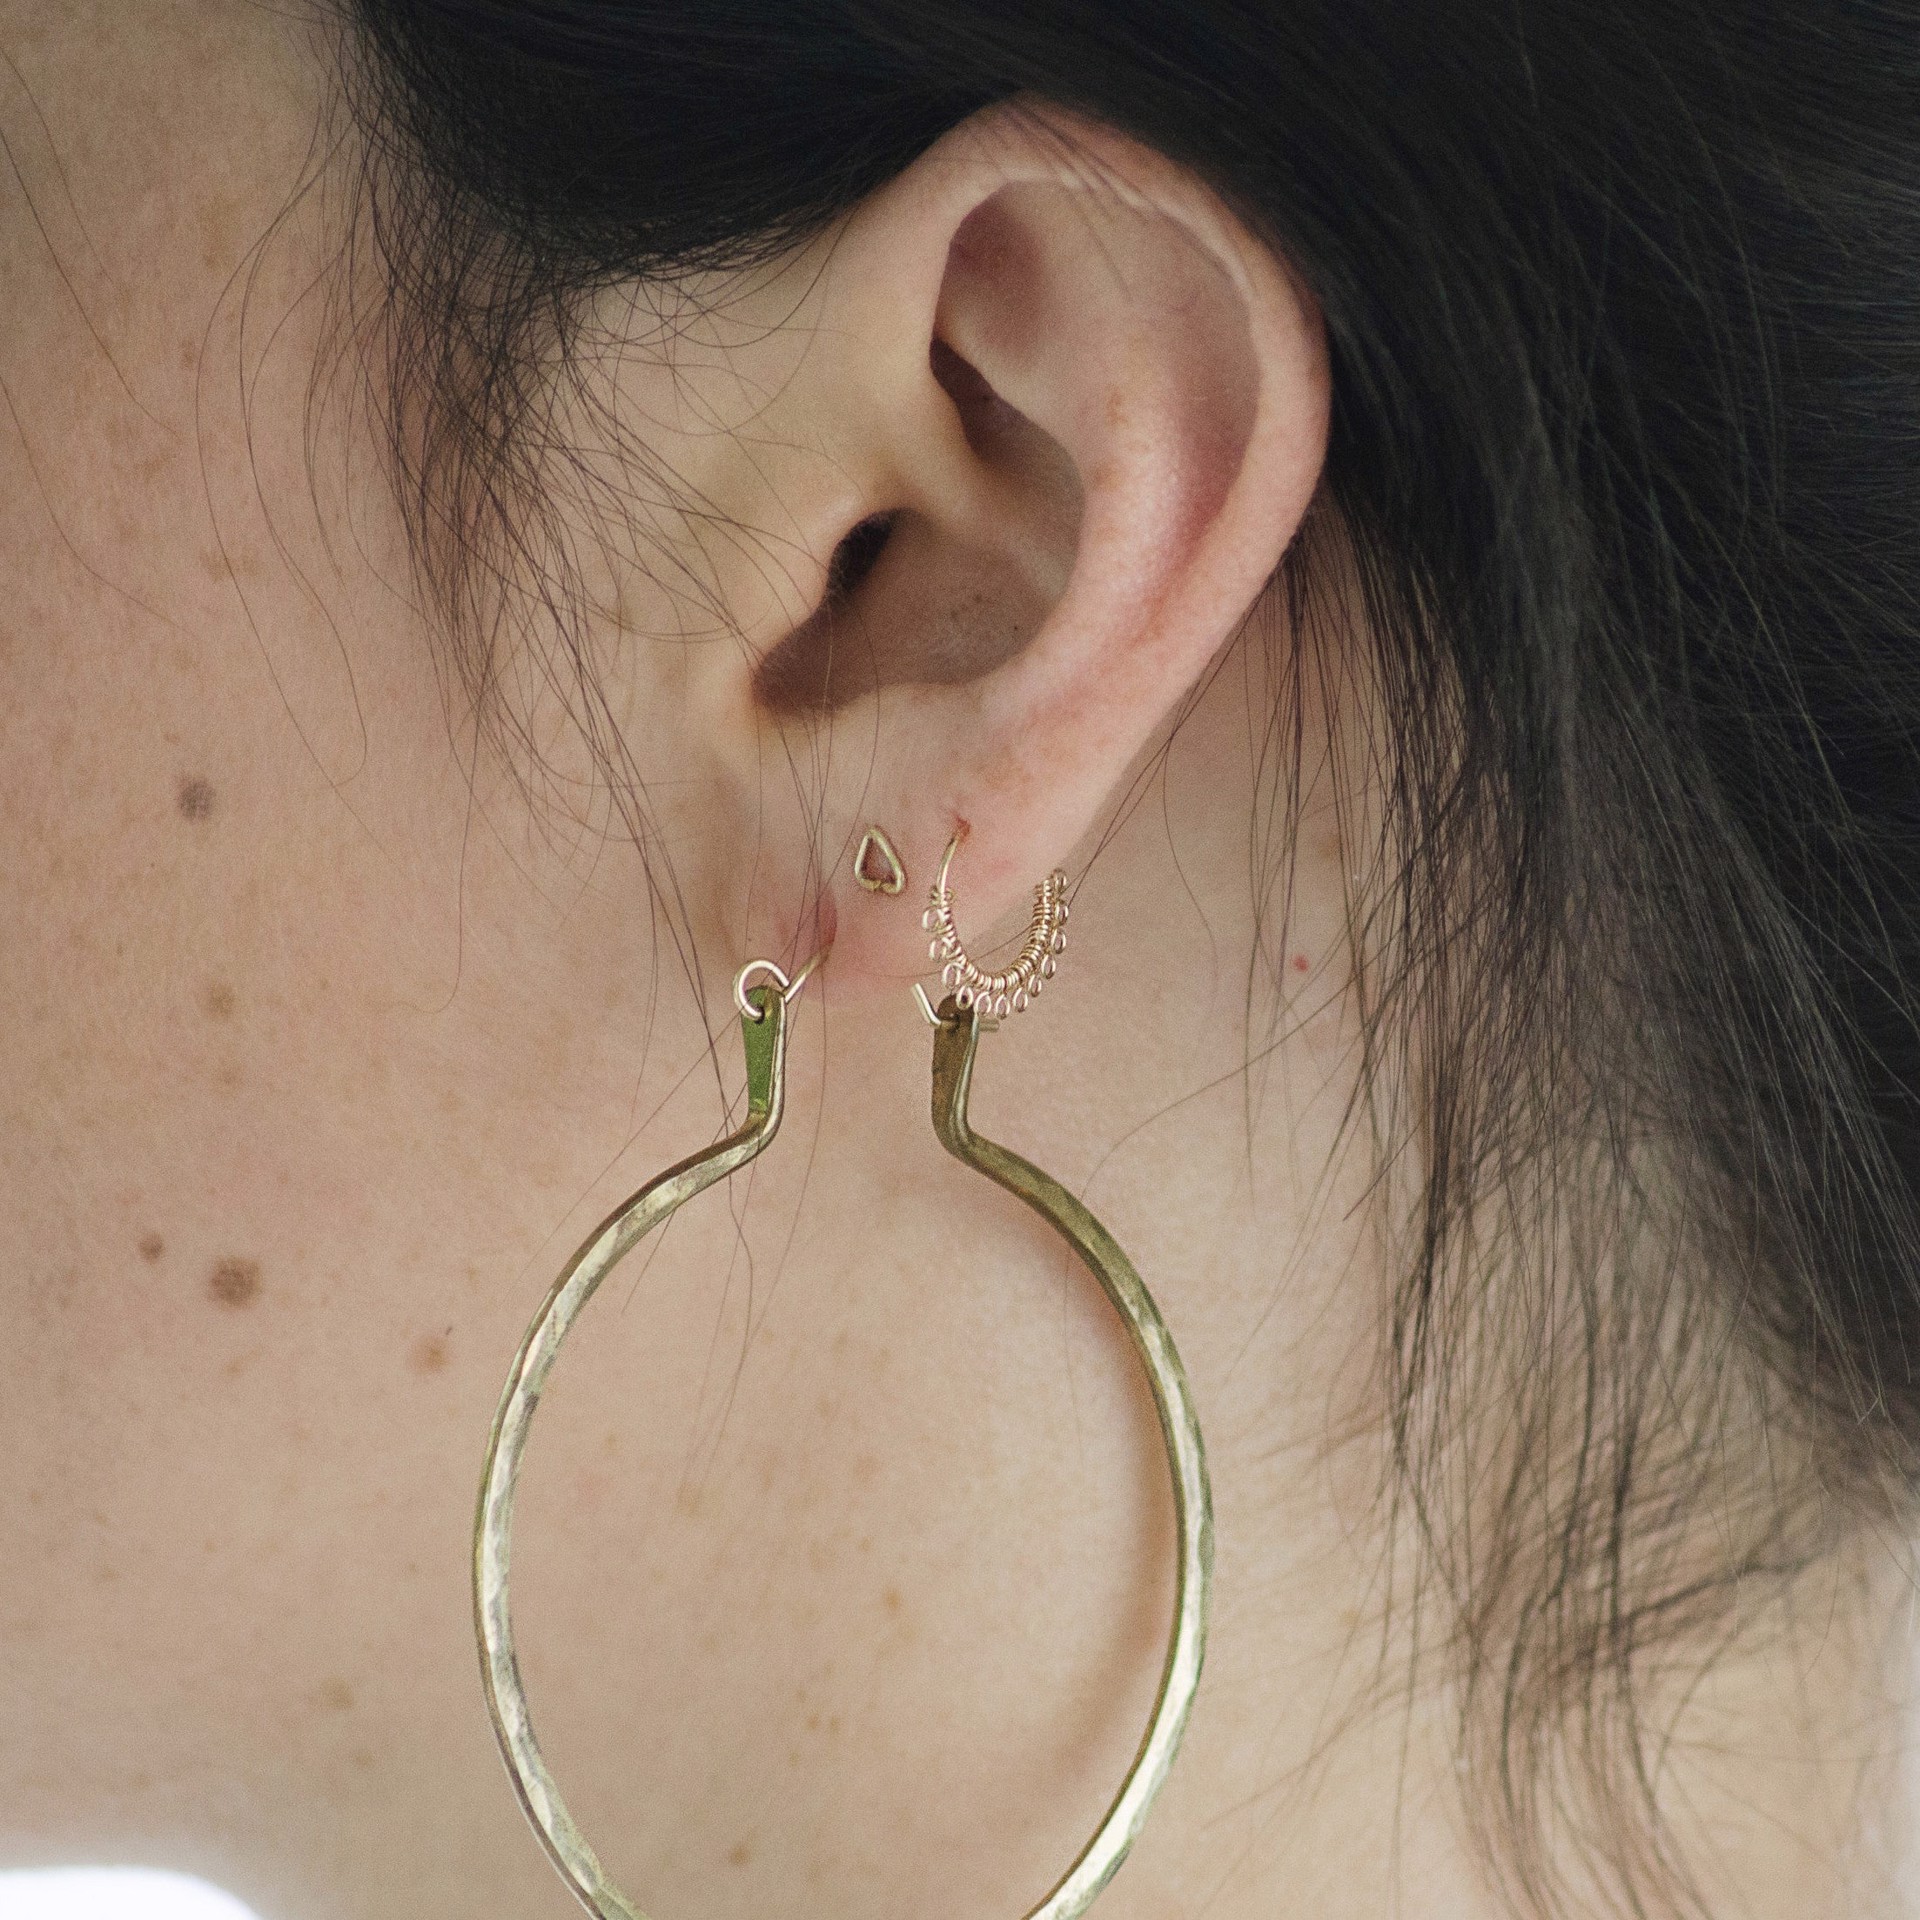 Filigree Nose Ring in Gold - 8mm by Clementine & Co. Jewelry